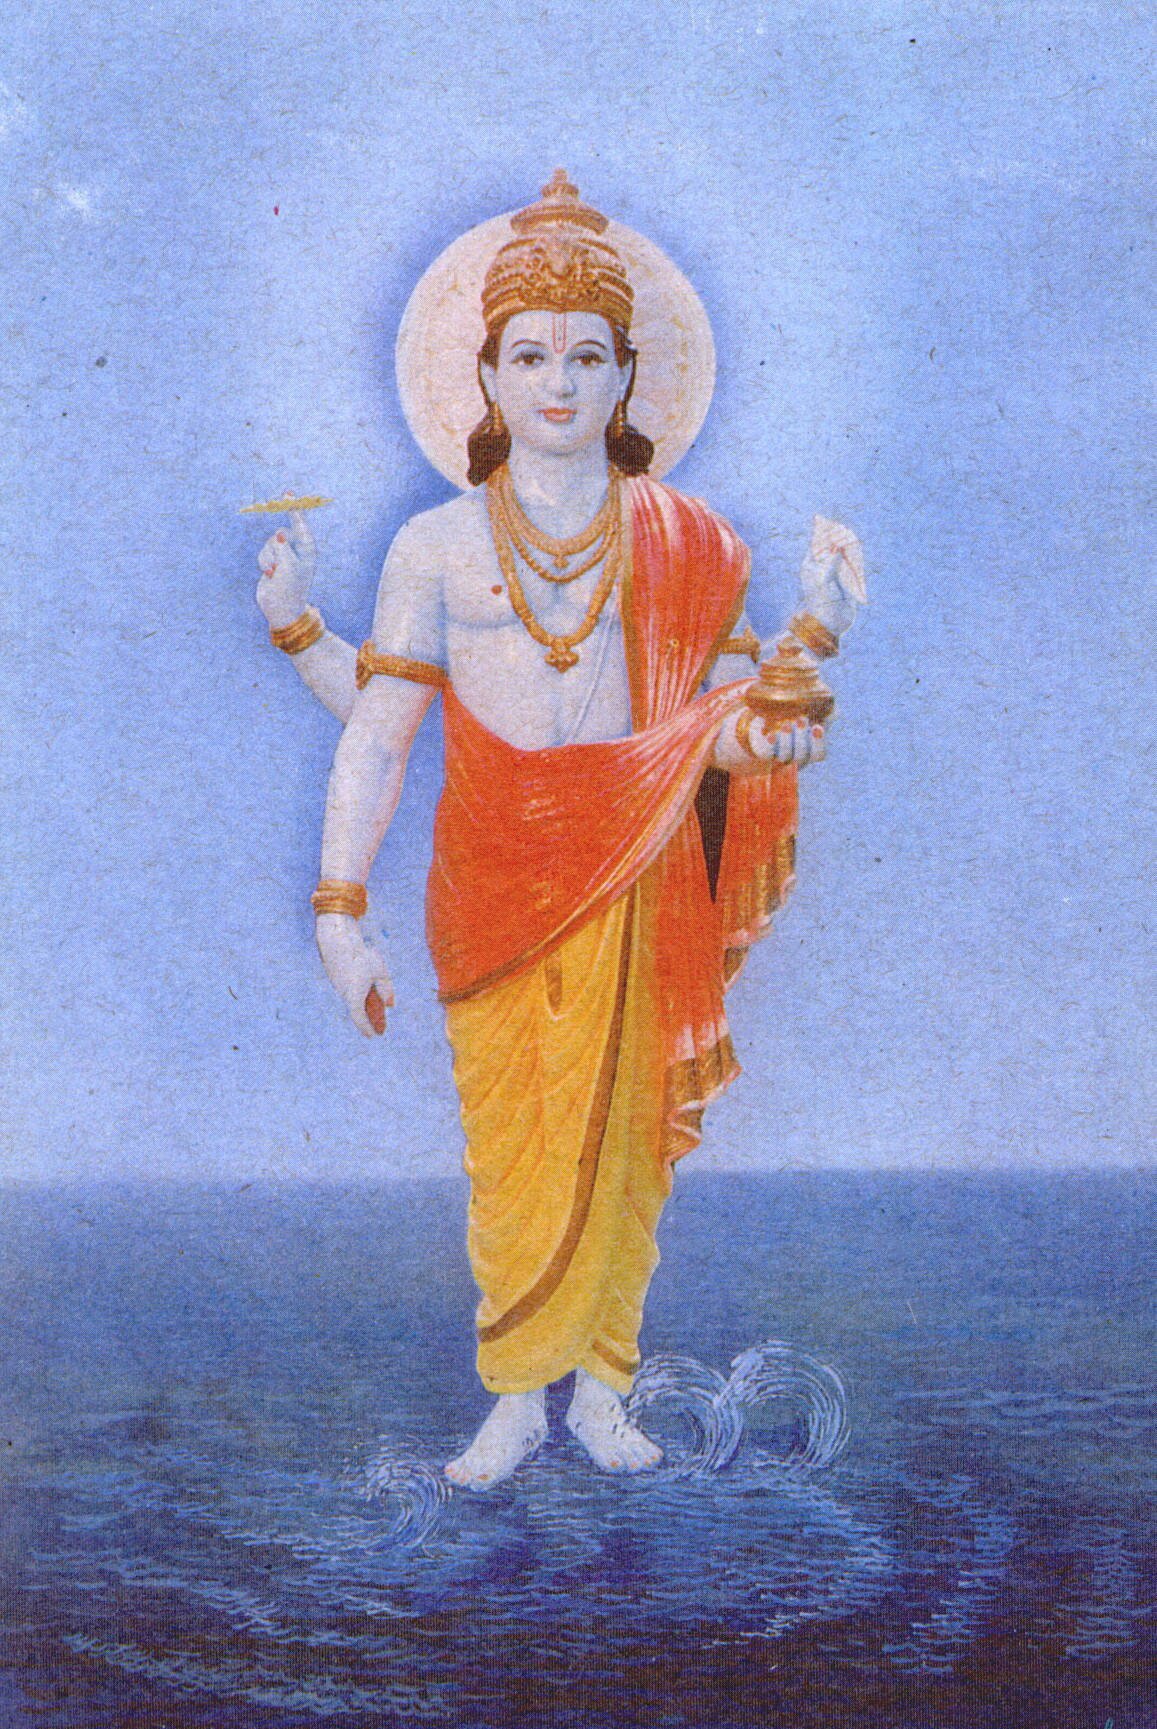 Lord Dhanvantari gave the knowledge of Ayurveda to Sushruta, the first Ayurvedic surgeon. Traditionally in his four hands are: a leech, a vessel of immortality gaining nectar, a conch shell, and a sphere of energy. Here the fourth hand contains an unknown item, perhaps the famous haritaki fruit. These items represent important Ayurvedic medicines. These herbs, etc. help us carry out our mission to bring wholistic healing to all. Each symbolizes a different approach to treatment, cleansing, rejuvenation, spiritual etc. Ayurvedic nutrition and life-style are their primary expressions, however. We serve Tequesta, North Palm Beach, Palm Beach, Lantana, Lake Worth, Wellington, Juno, Singer Island, also.